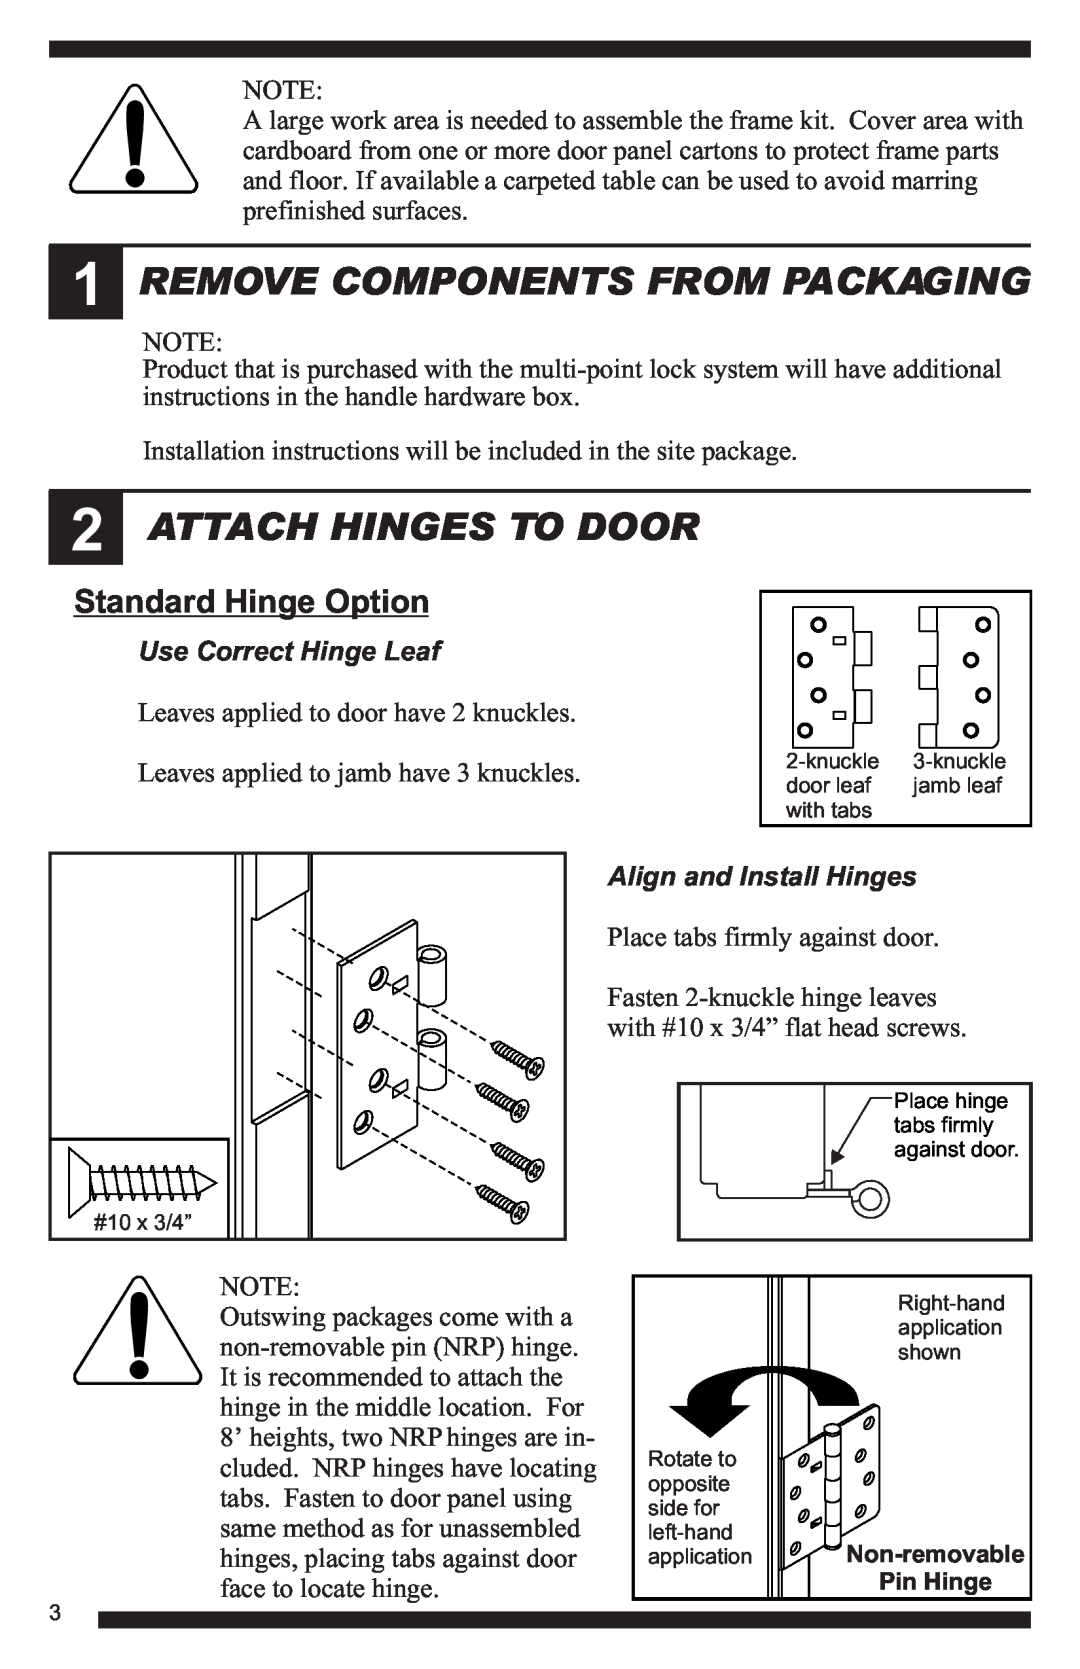 Therma-Tru Hinged Patio Door System Single Panel Assembly Unit Remove Components From Packaging, Attach Hinges To Door 